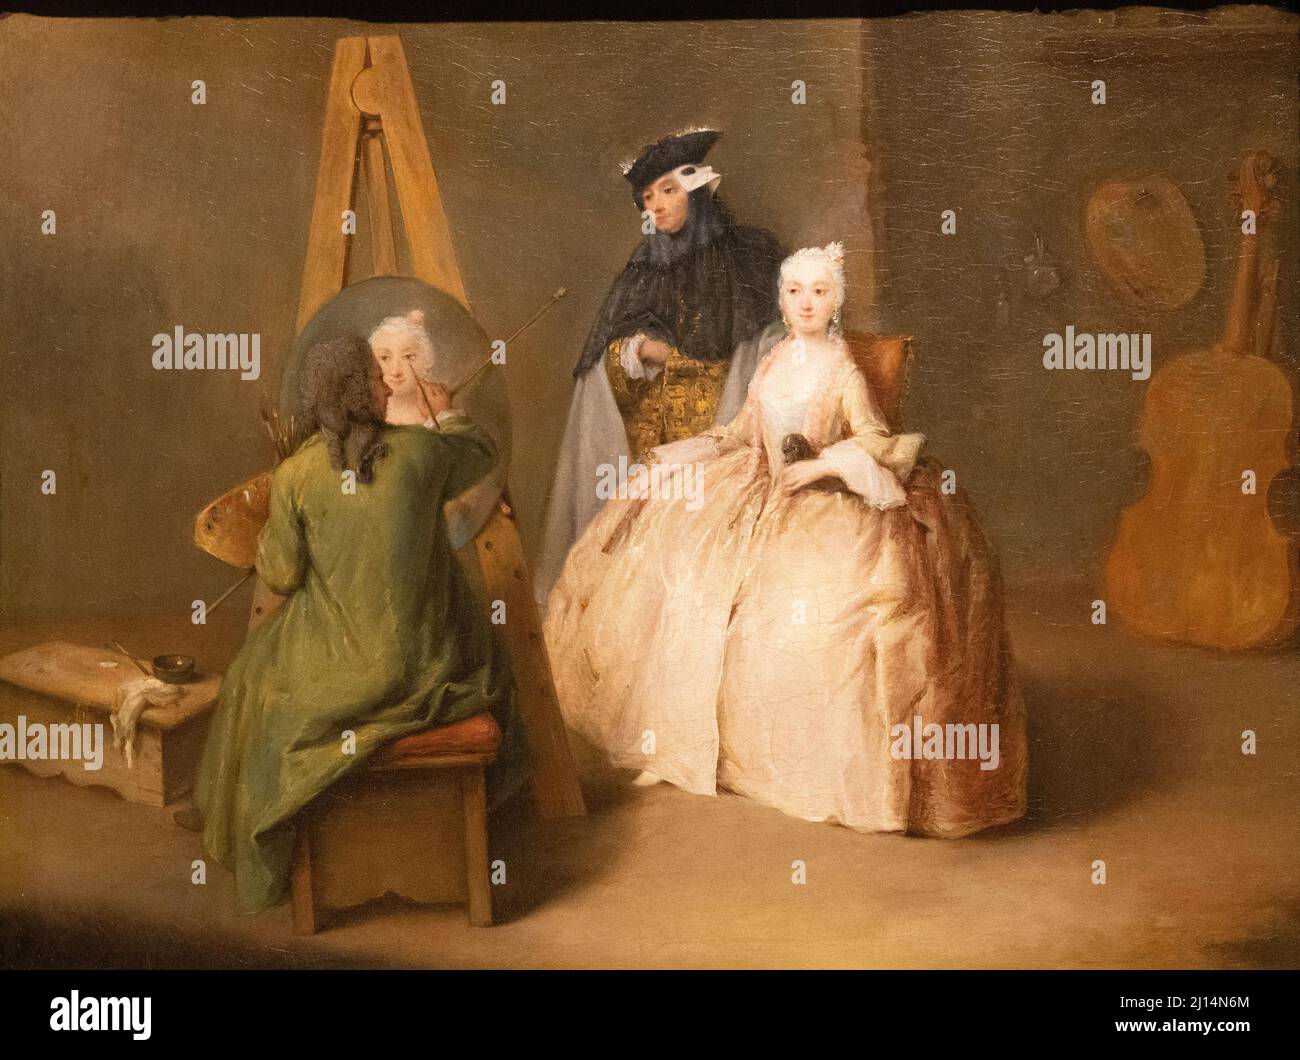 Pietro Longhi painting, 'The Painter in his Studio', 1741-1744, 18th century old master, by Longhi, Venetian Italian, Oil on canvas. Stock Photo